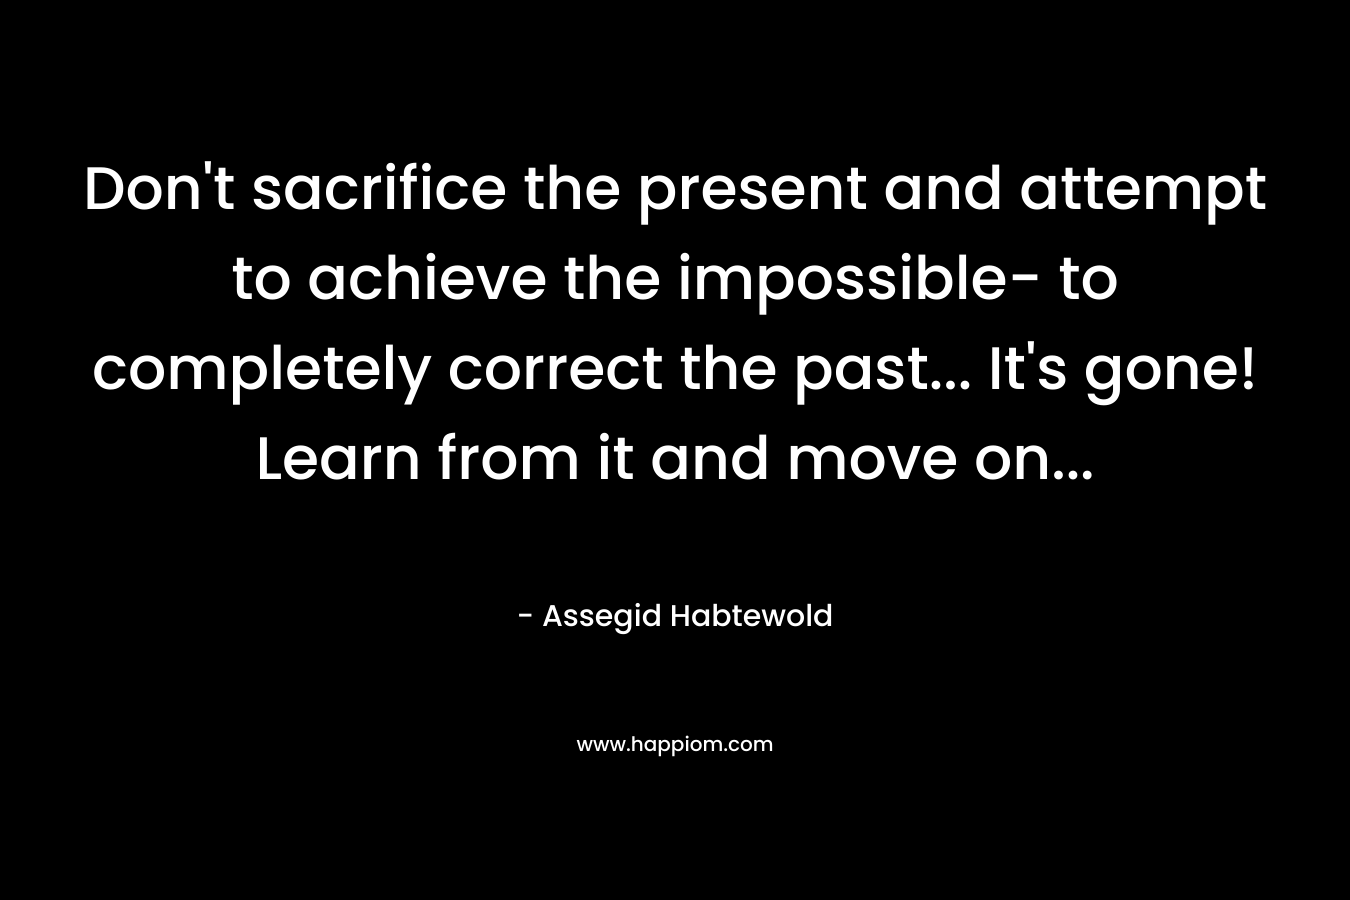 Don't sacrifice the present and attempt to achieve the impossible- to completely correct the past... It's gone! Learn from it and move on...